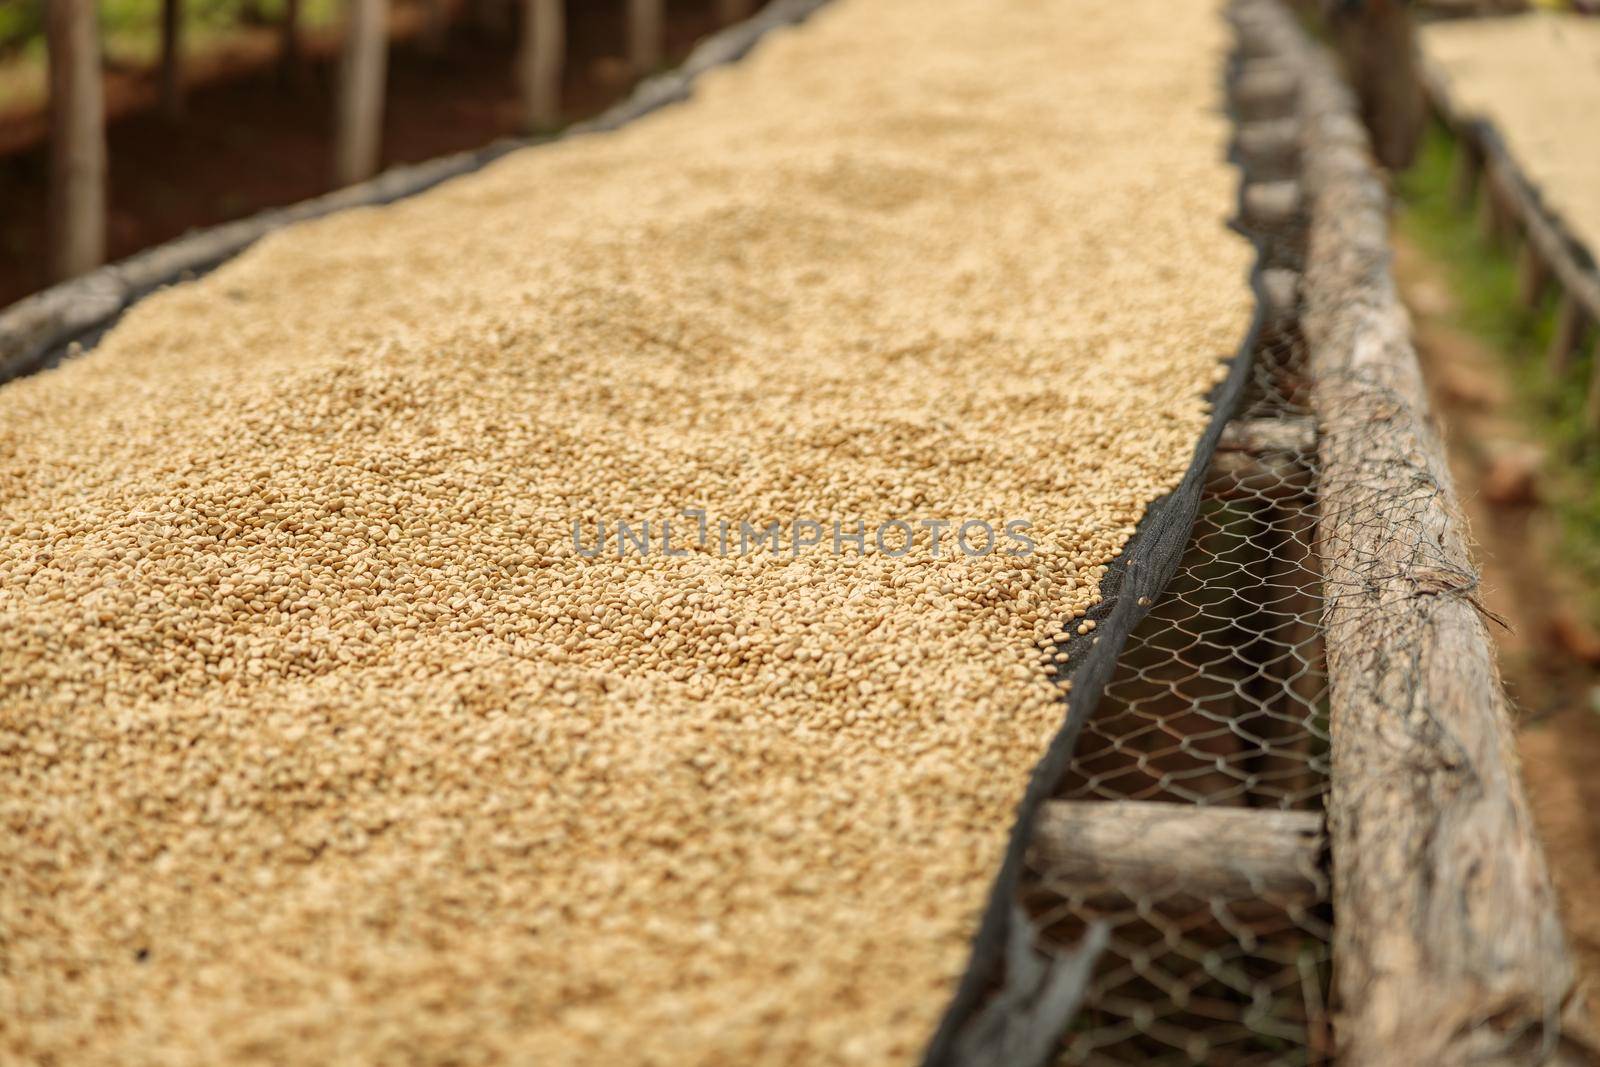 Close up of dried coffee beans on wooden tables during drying outdoors, Africa